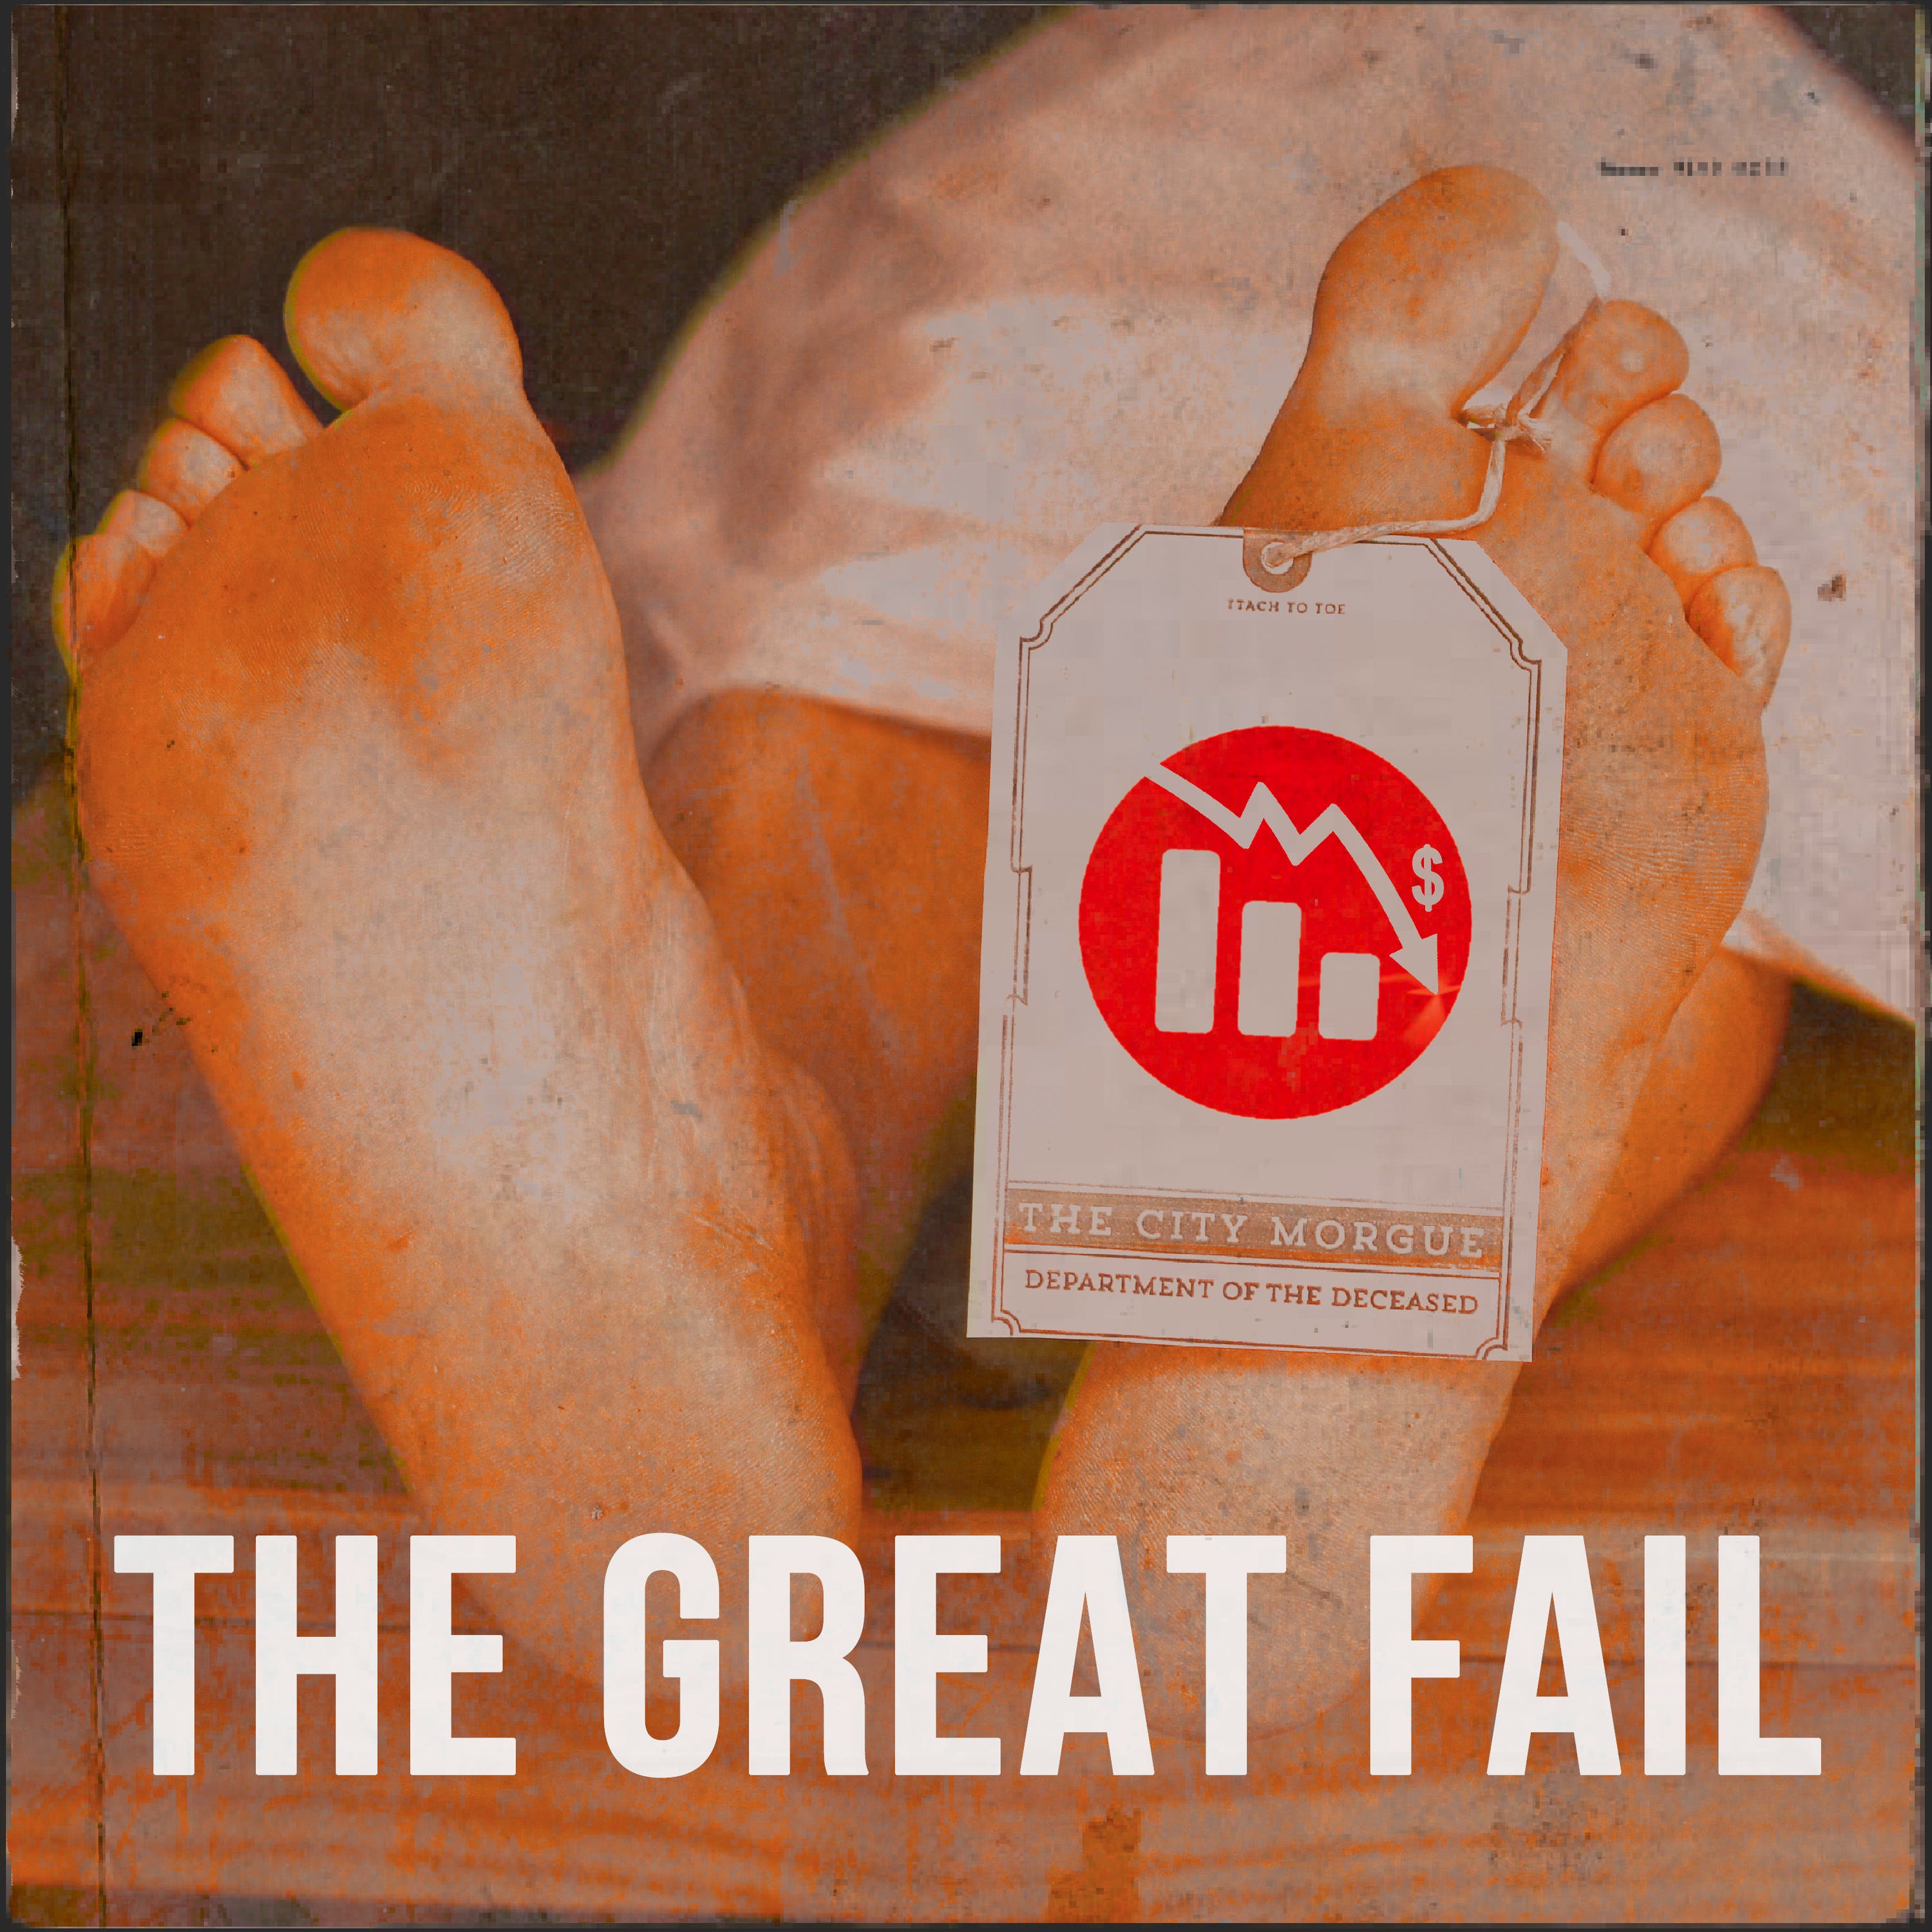 The Great Fail: Episode 54: LulaRoe Leggings Stretches the Law on